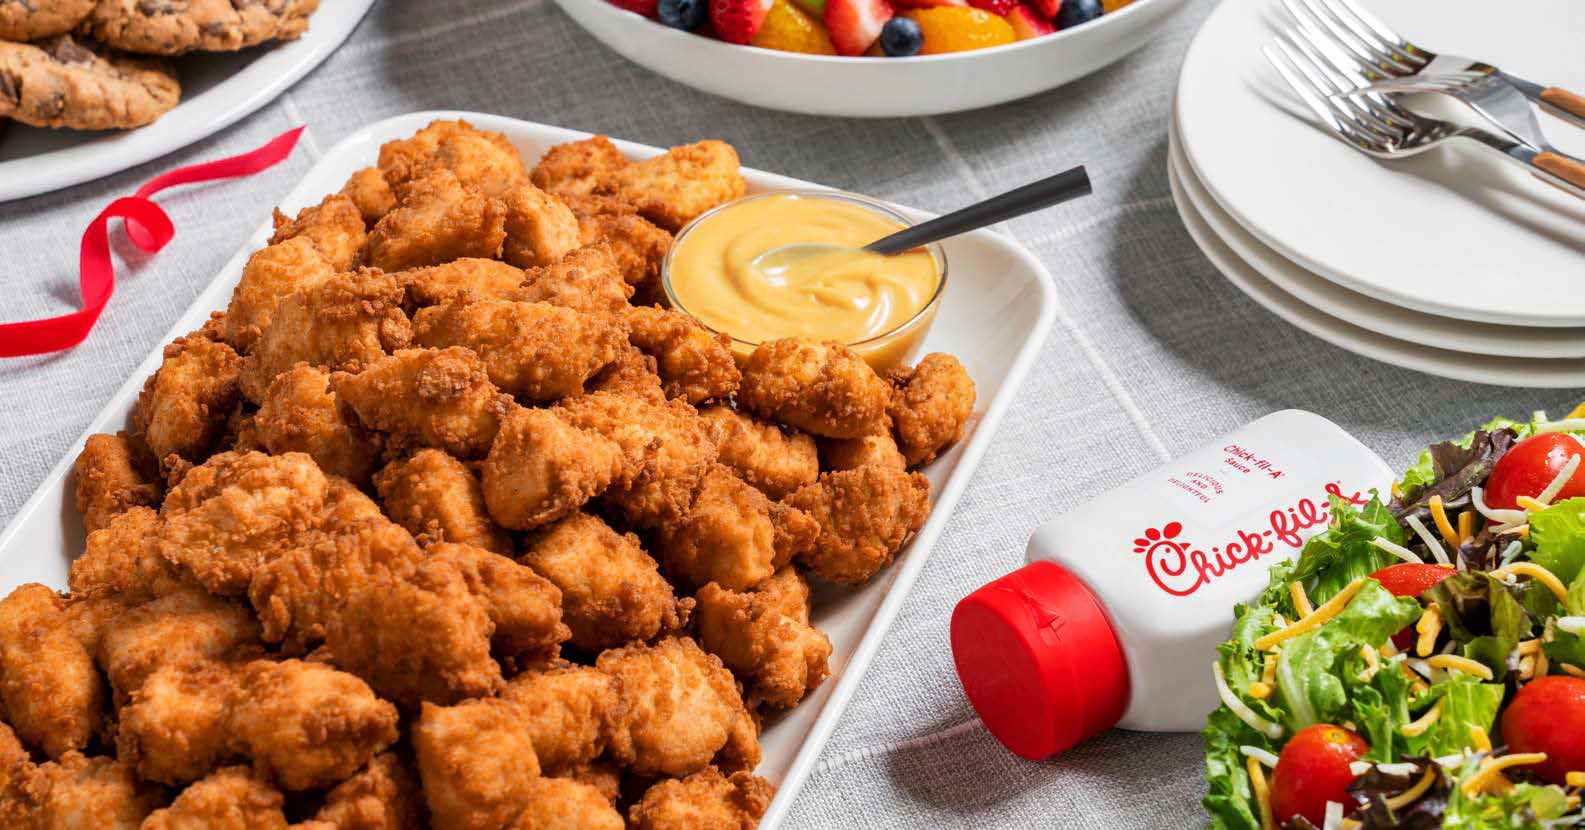 Chick-fil-A Nugget Tray with a bottle of Chick-fil-A Sauce and Garden Salad Tray.  